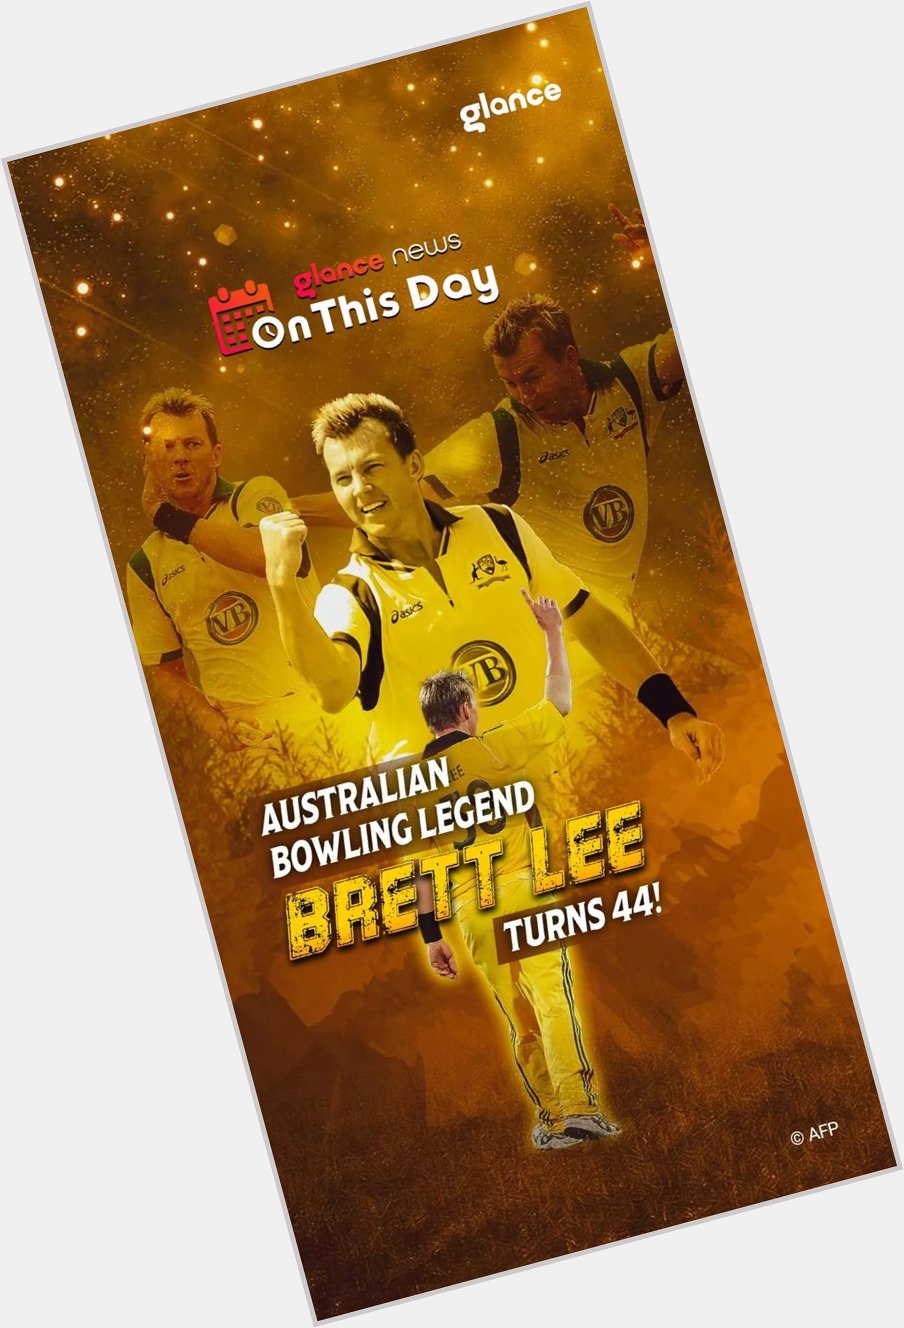 On This Day: My Favorite aussie player Brett Lee turns 44!  Happy birthday bret lee. May you live happy and healthy. 